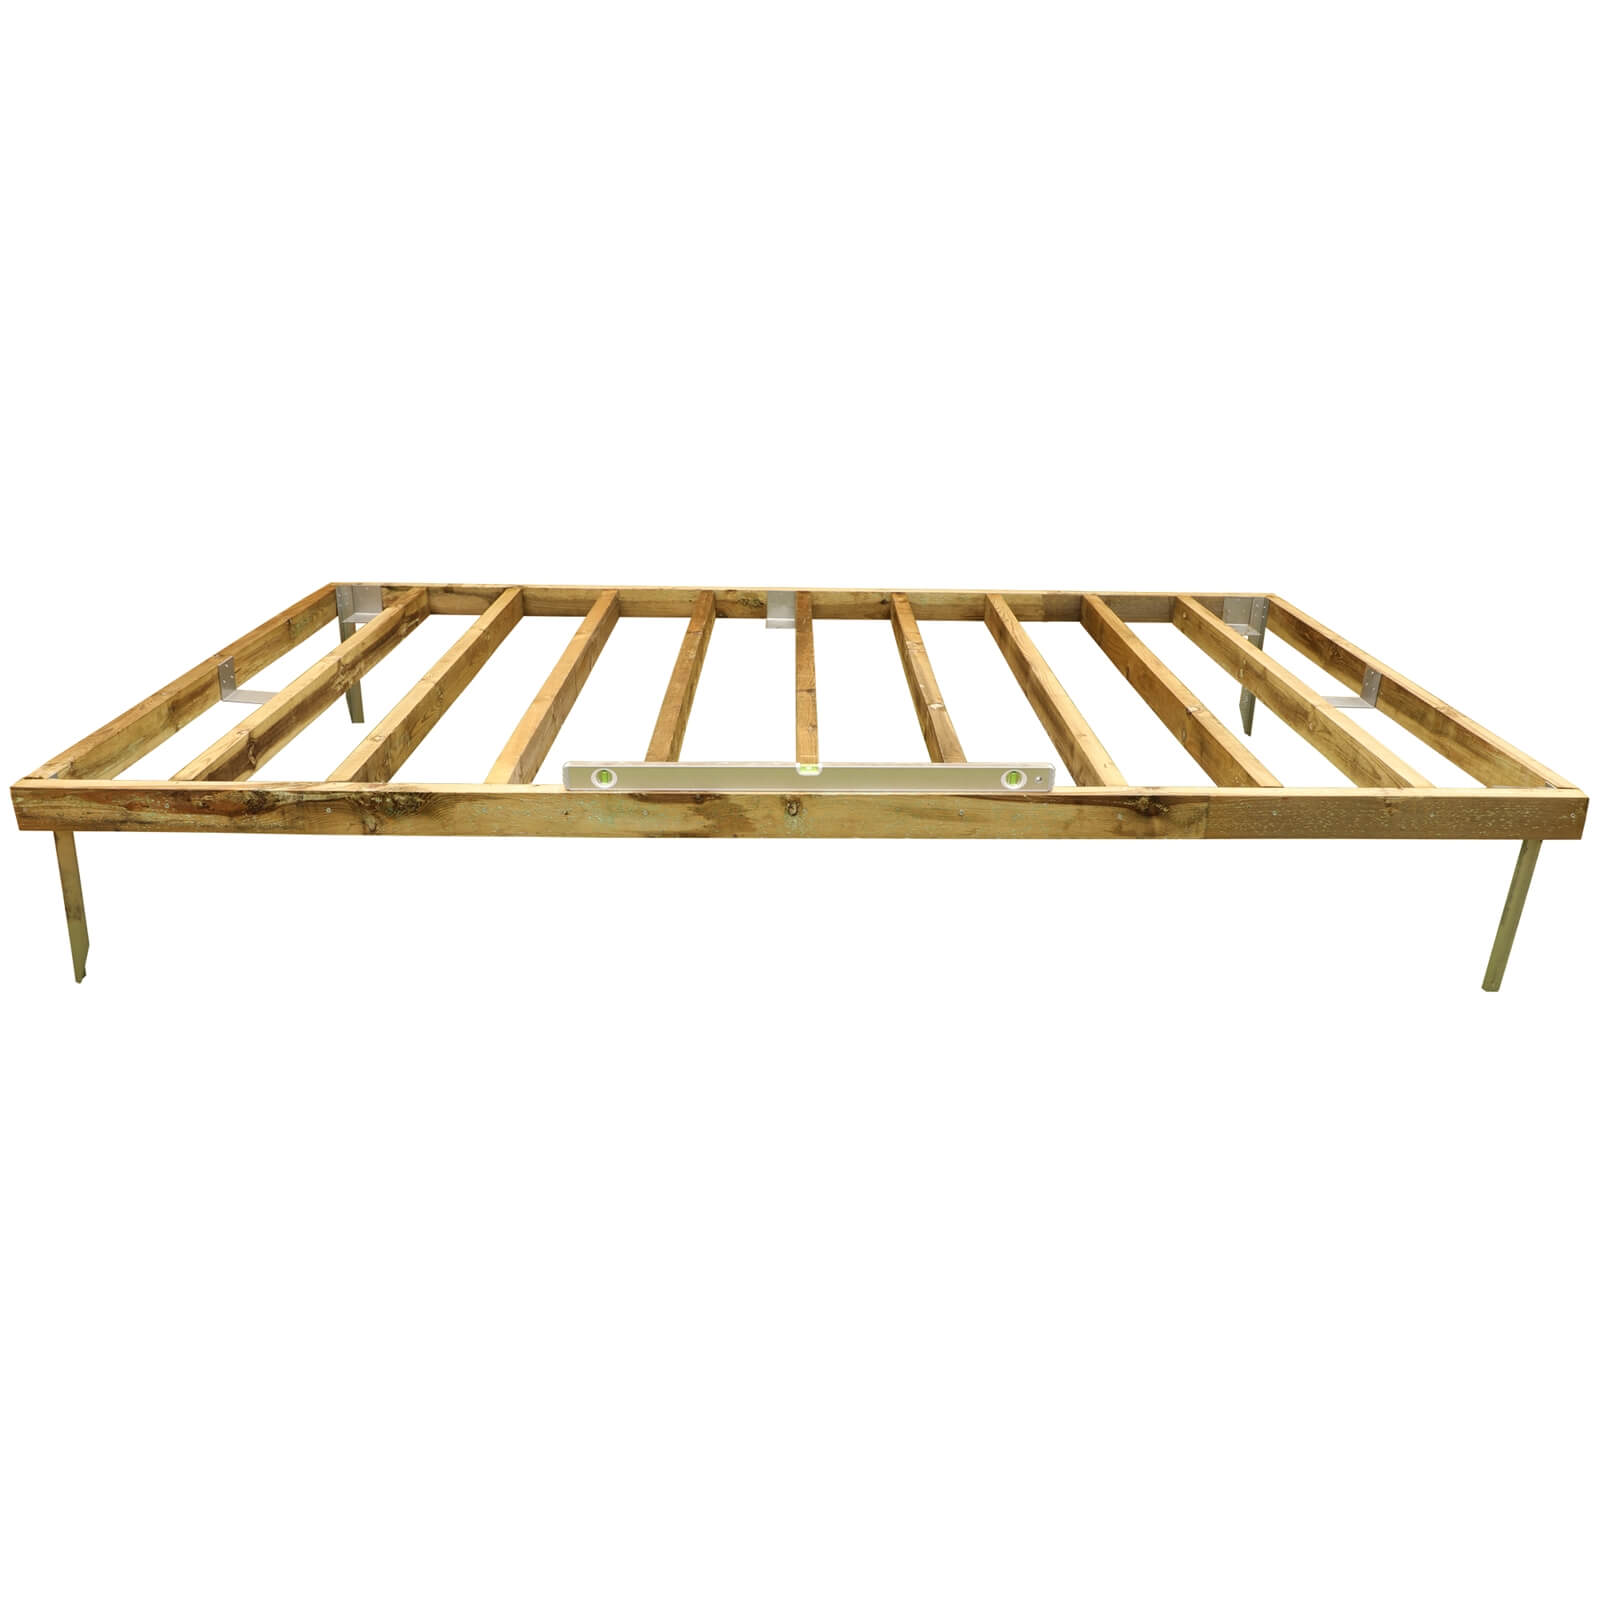 Photo of Mercia 10x6ft Pressure Treated Wooden Shed Base